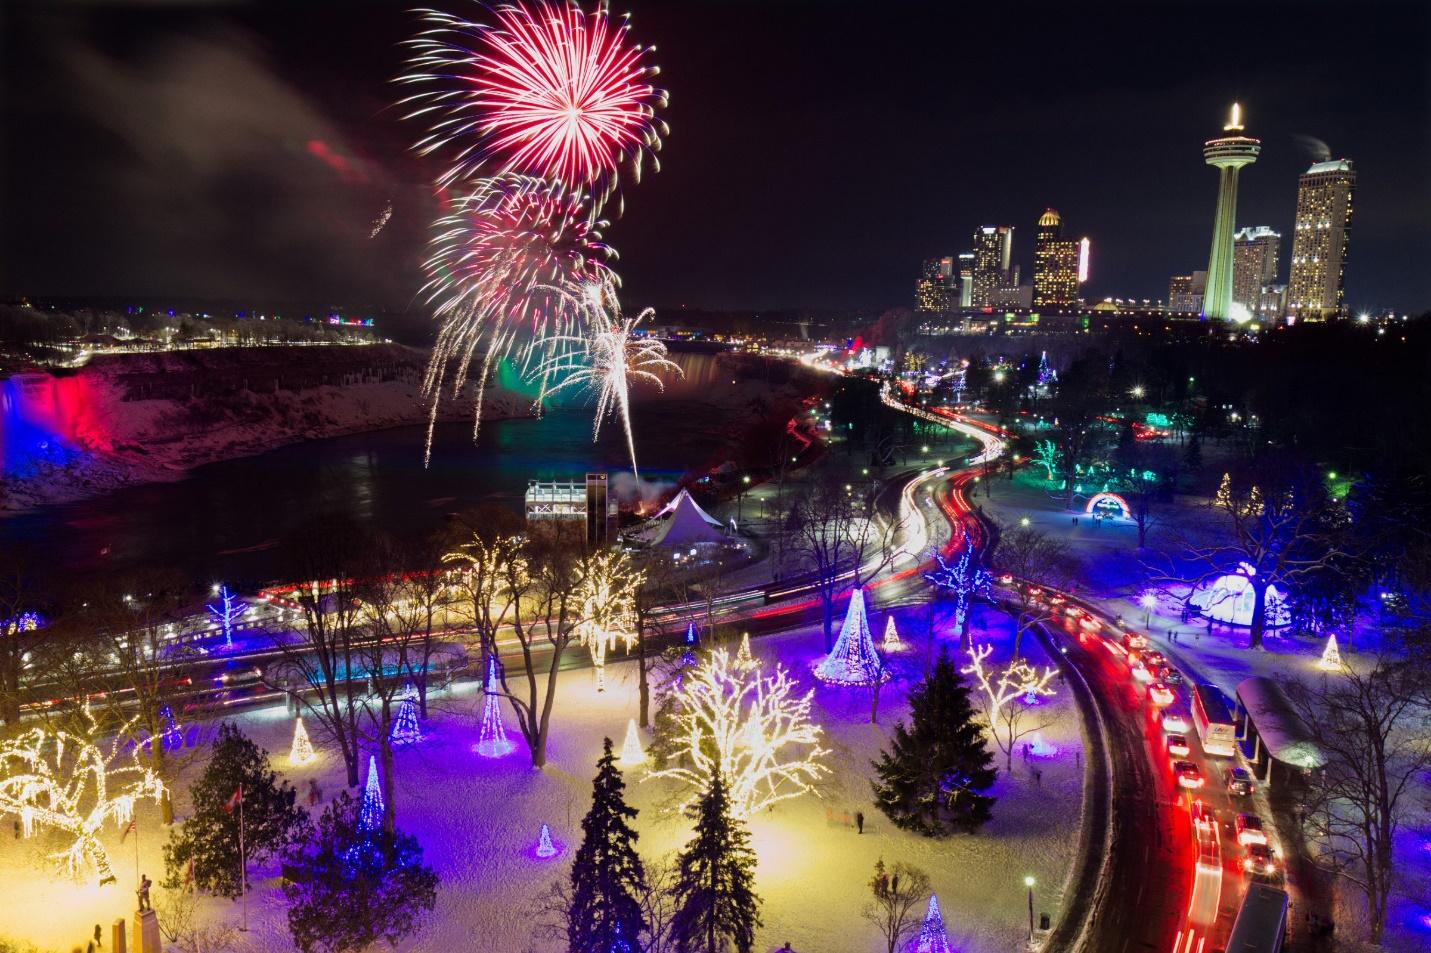 Niagara's Winter Festival of Lights starts next month with bigger plans  than ever